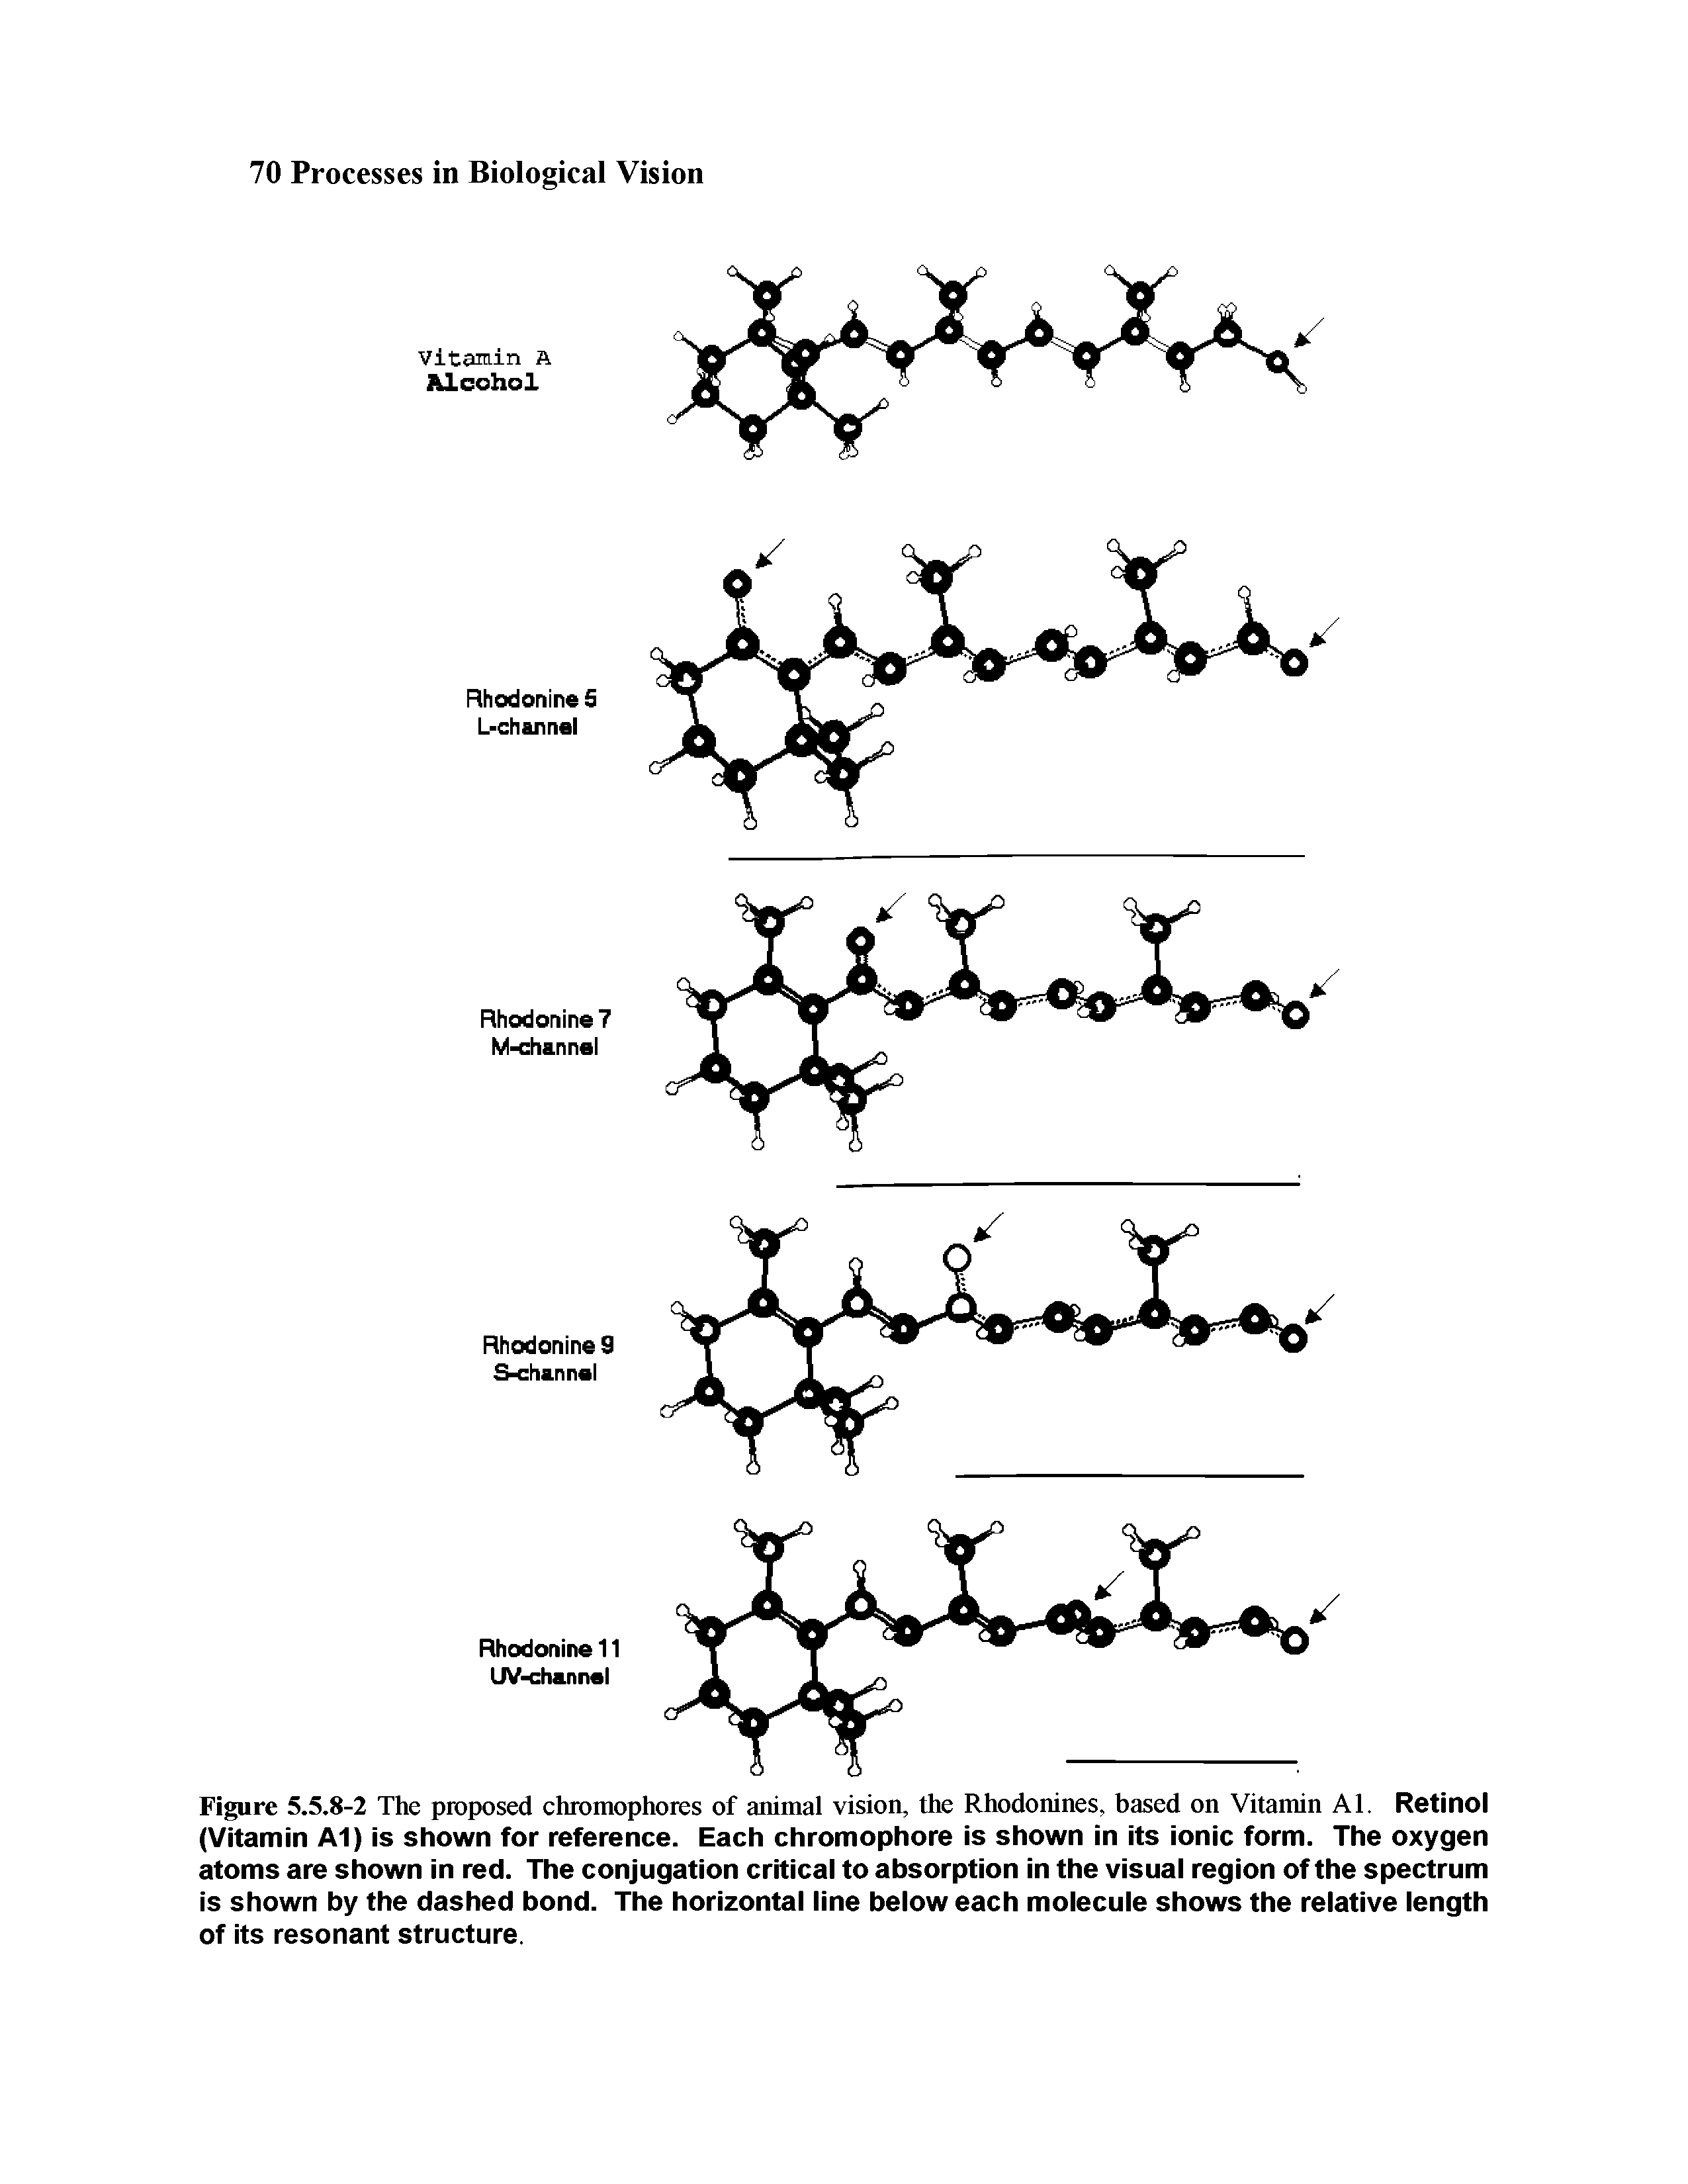 Figure 5.5.8-2 The proposed chromophores of animal vision, the Rhodonines, based on Vitamin Al. Retinol (Vitamin A1) is shown for reference. Each chromophore is shown in its ionic form. The oxygen atoms are shown in red. The conjugation critical to absorption in the visual region of the spectrum is shown by the dashed bond. The horizontal line below each molecule shows the relative length of its resonant structure.